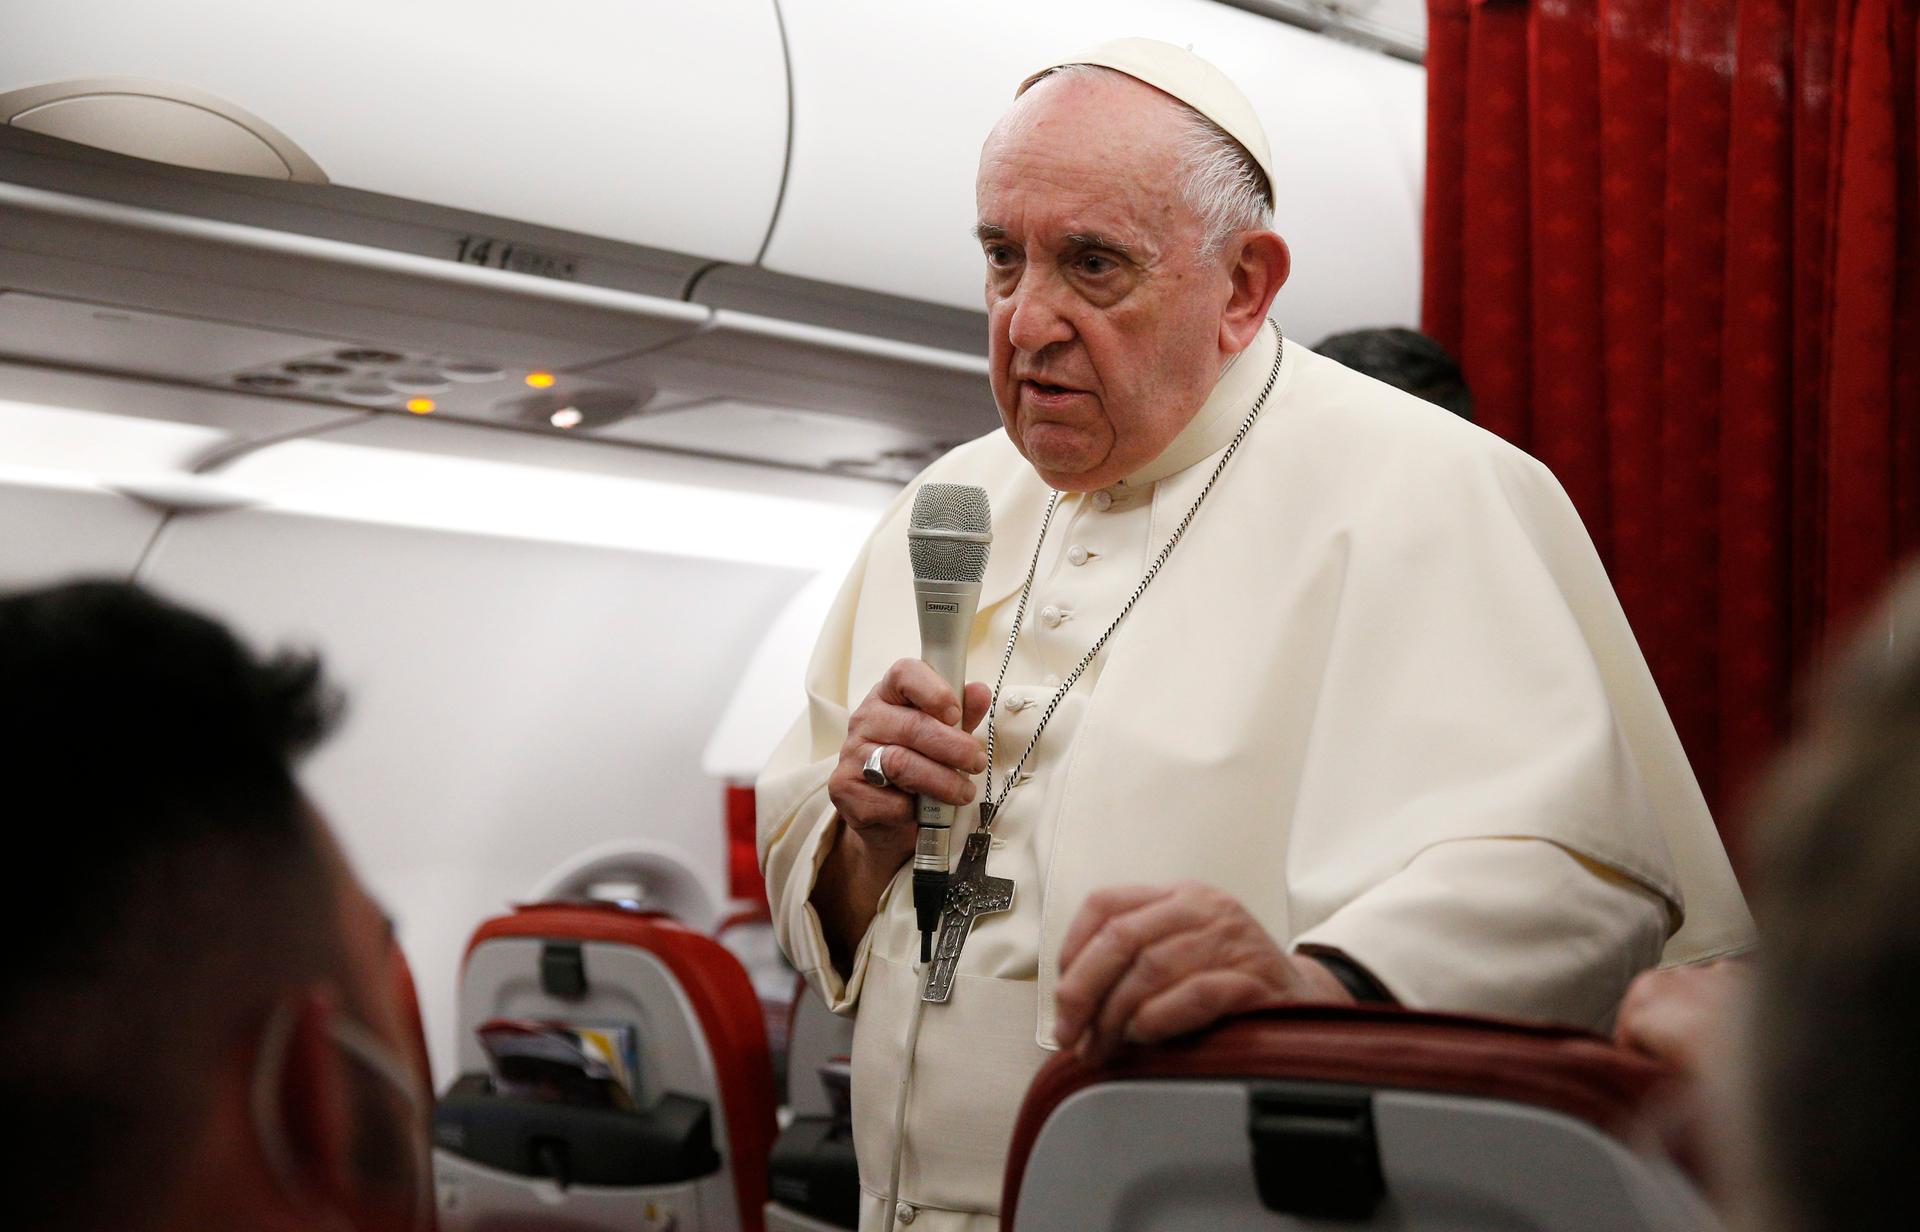 Pope indicates he has not spoken directly to Putin about Ukraine war